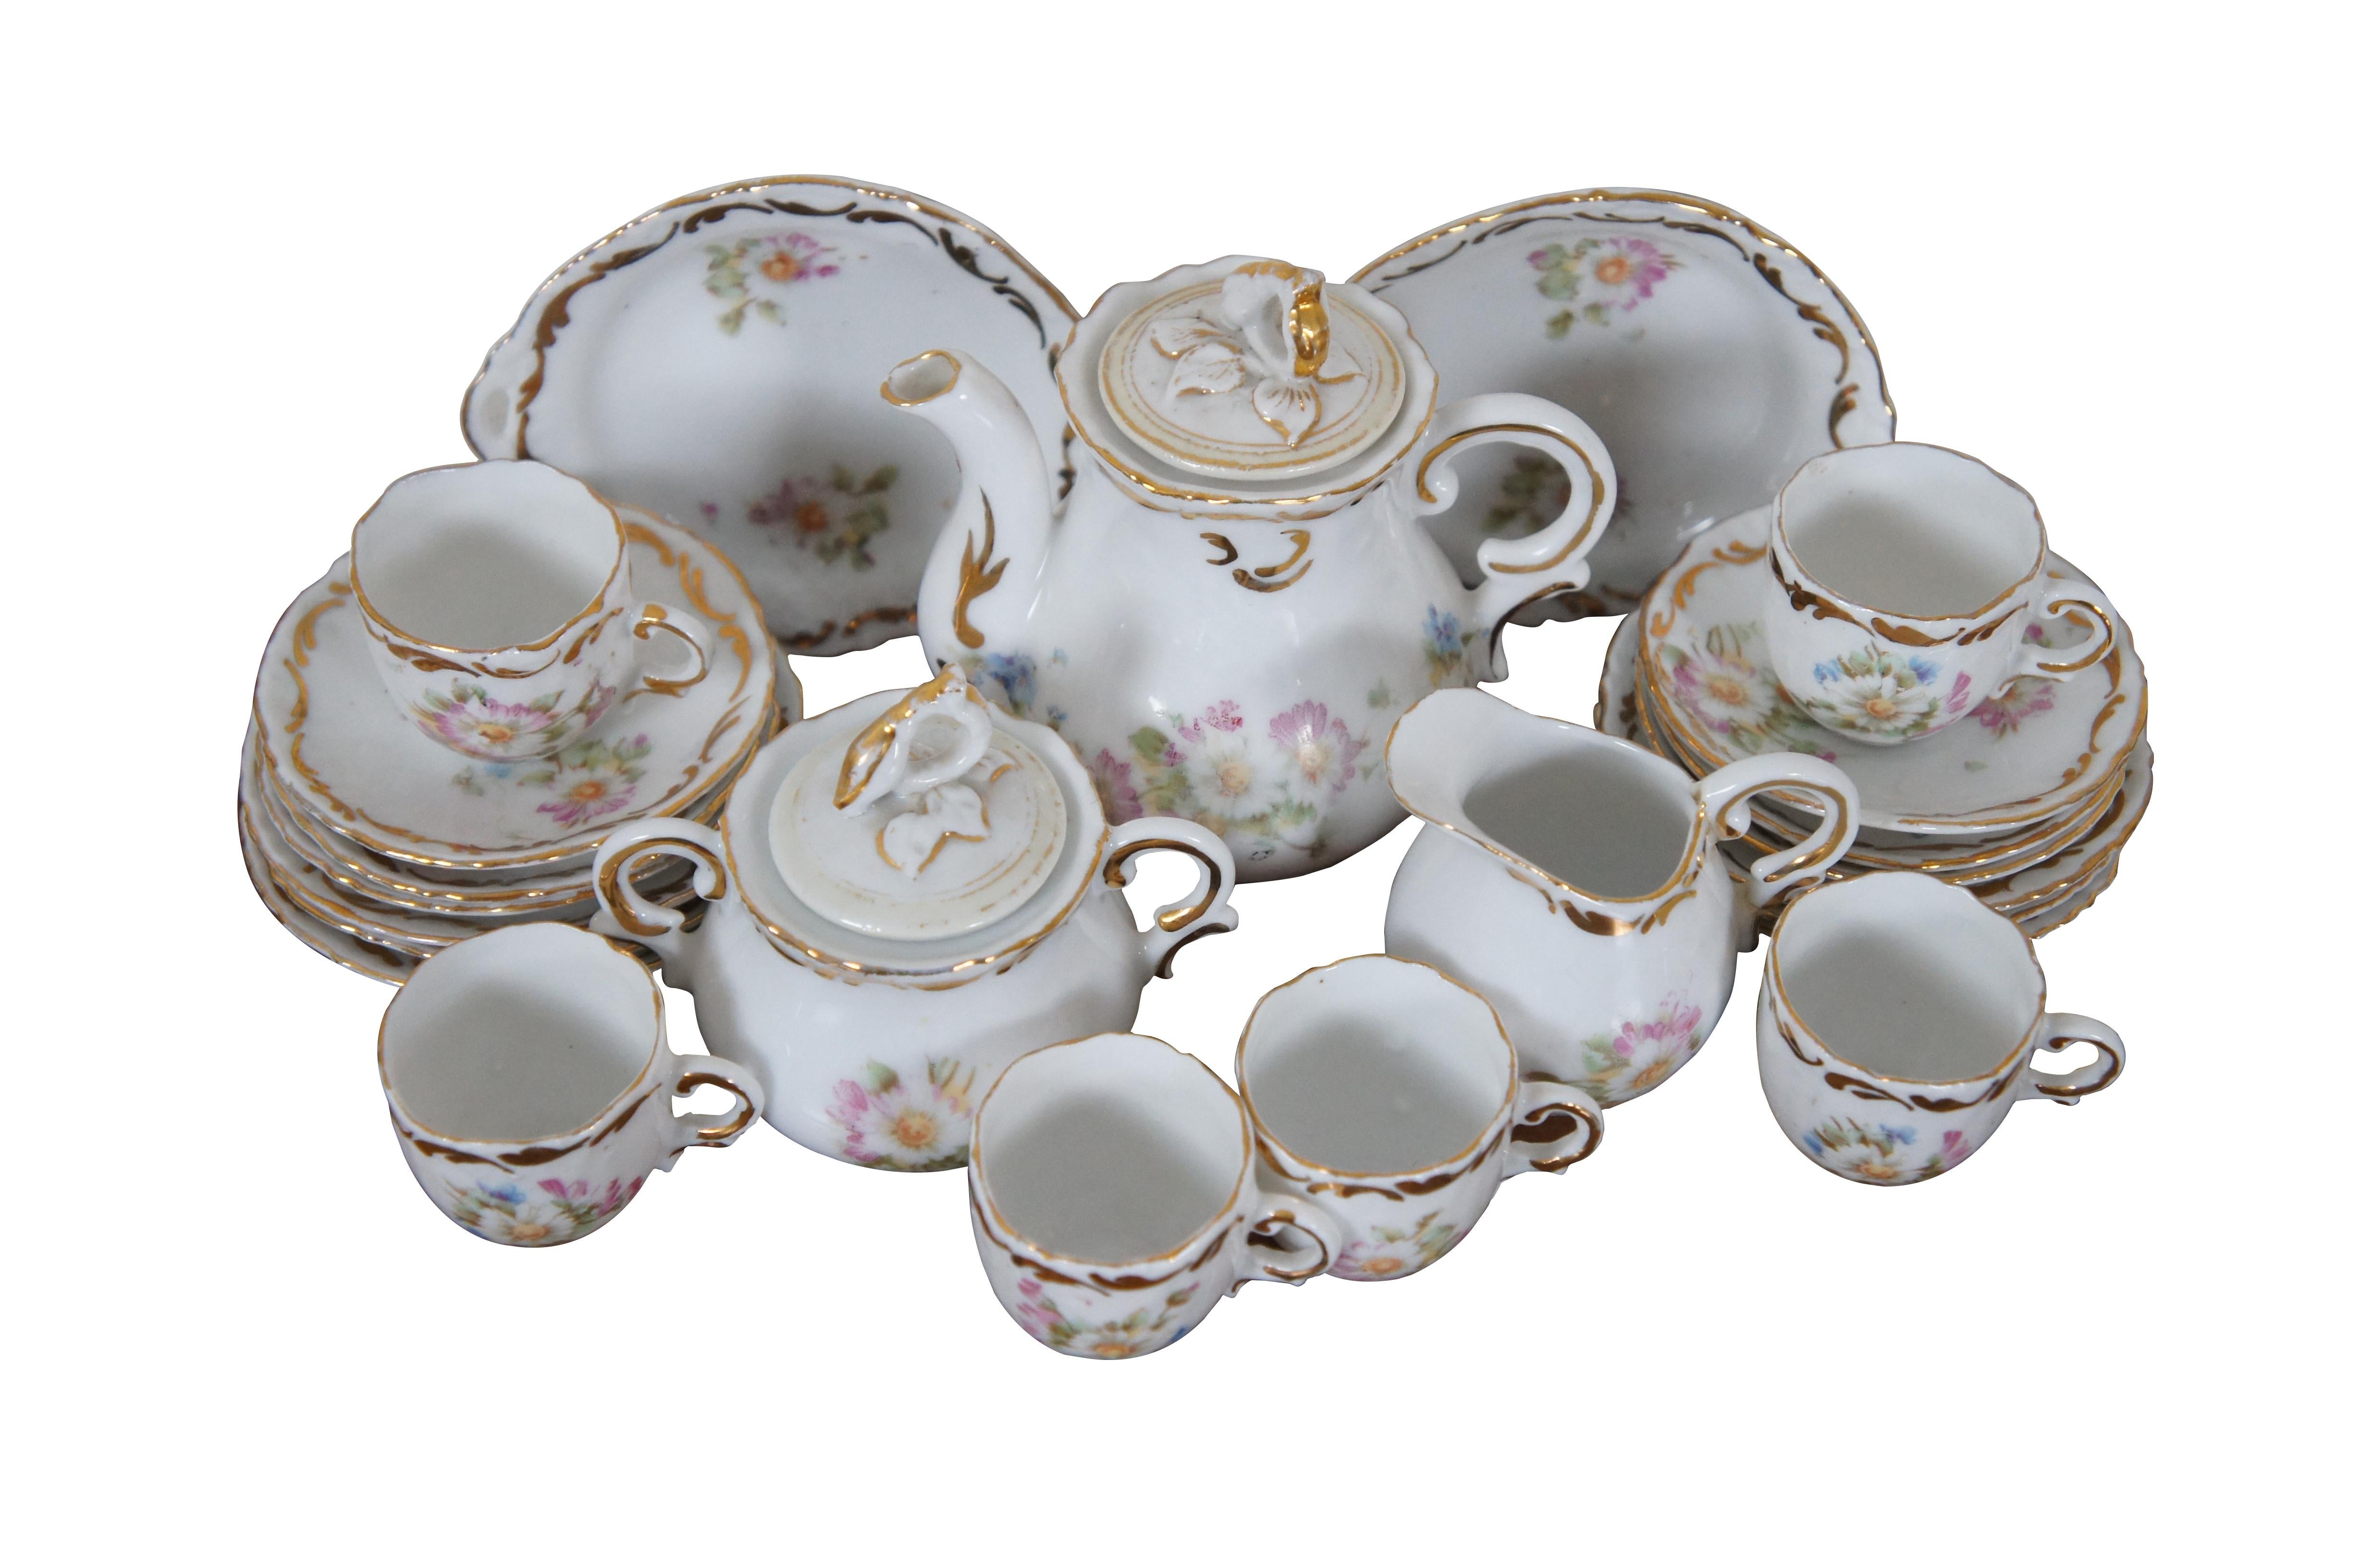 Early 20th century child’s miniature / dollhouse porcelain tea set featuring gently scalloped edges with gilded foliate accents and a printed pattern of pink and white daisies and blue forget-me-nots. Set includes 2 serving plates, 6 dessert plates,